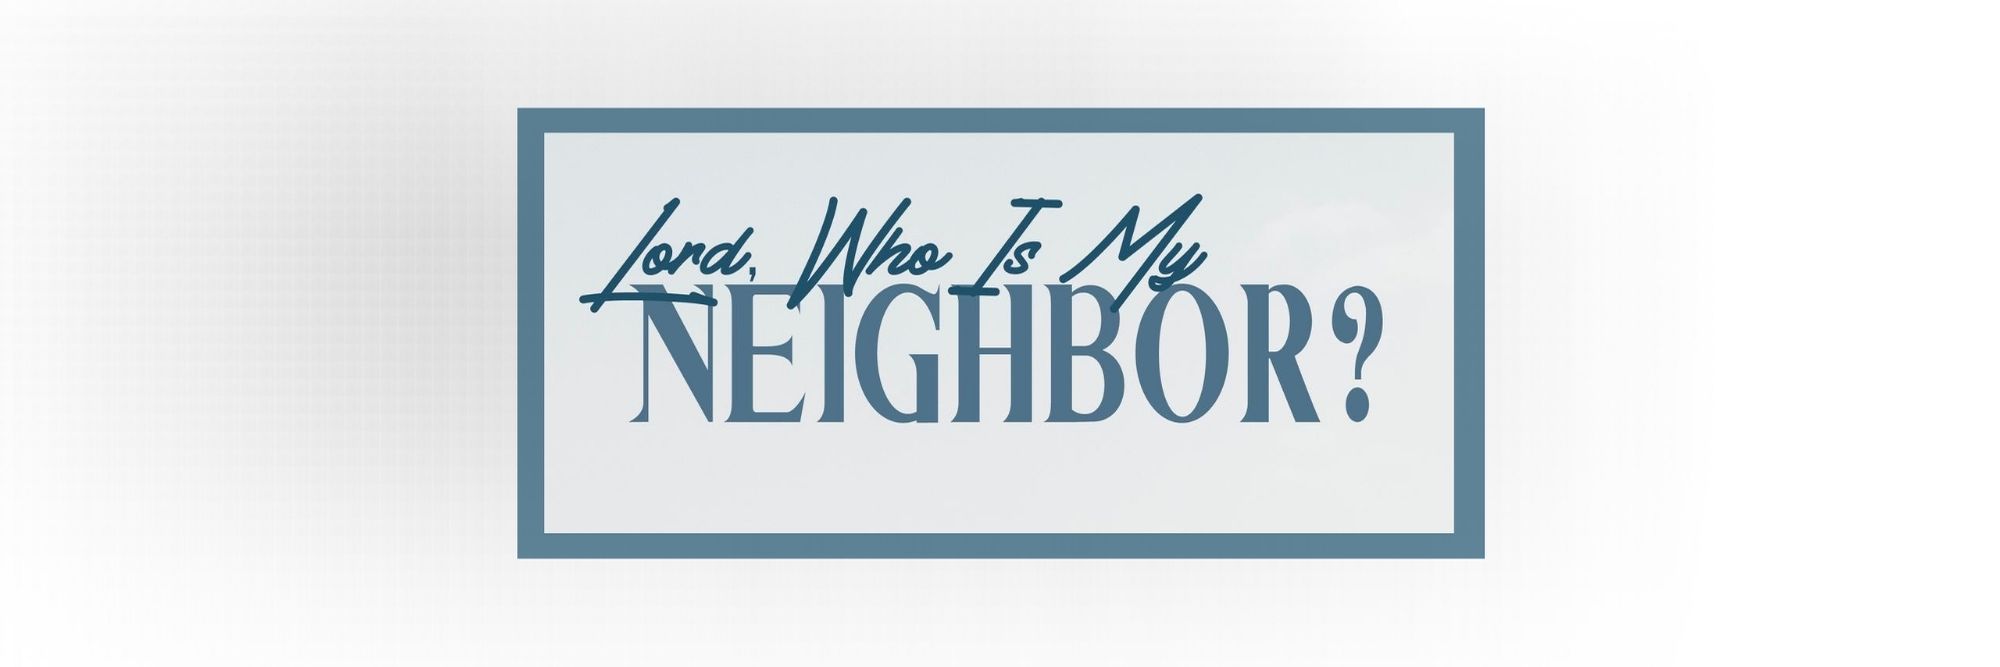 Lord, Who is my Neighbor: Dustin Smith